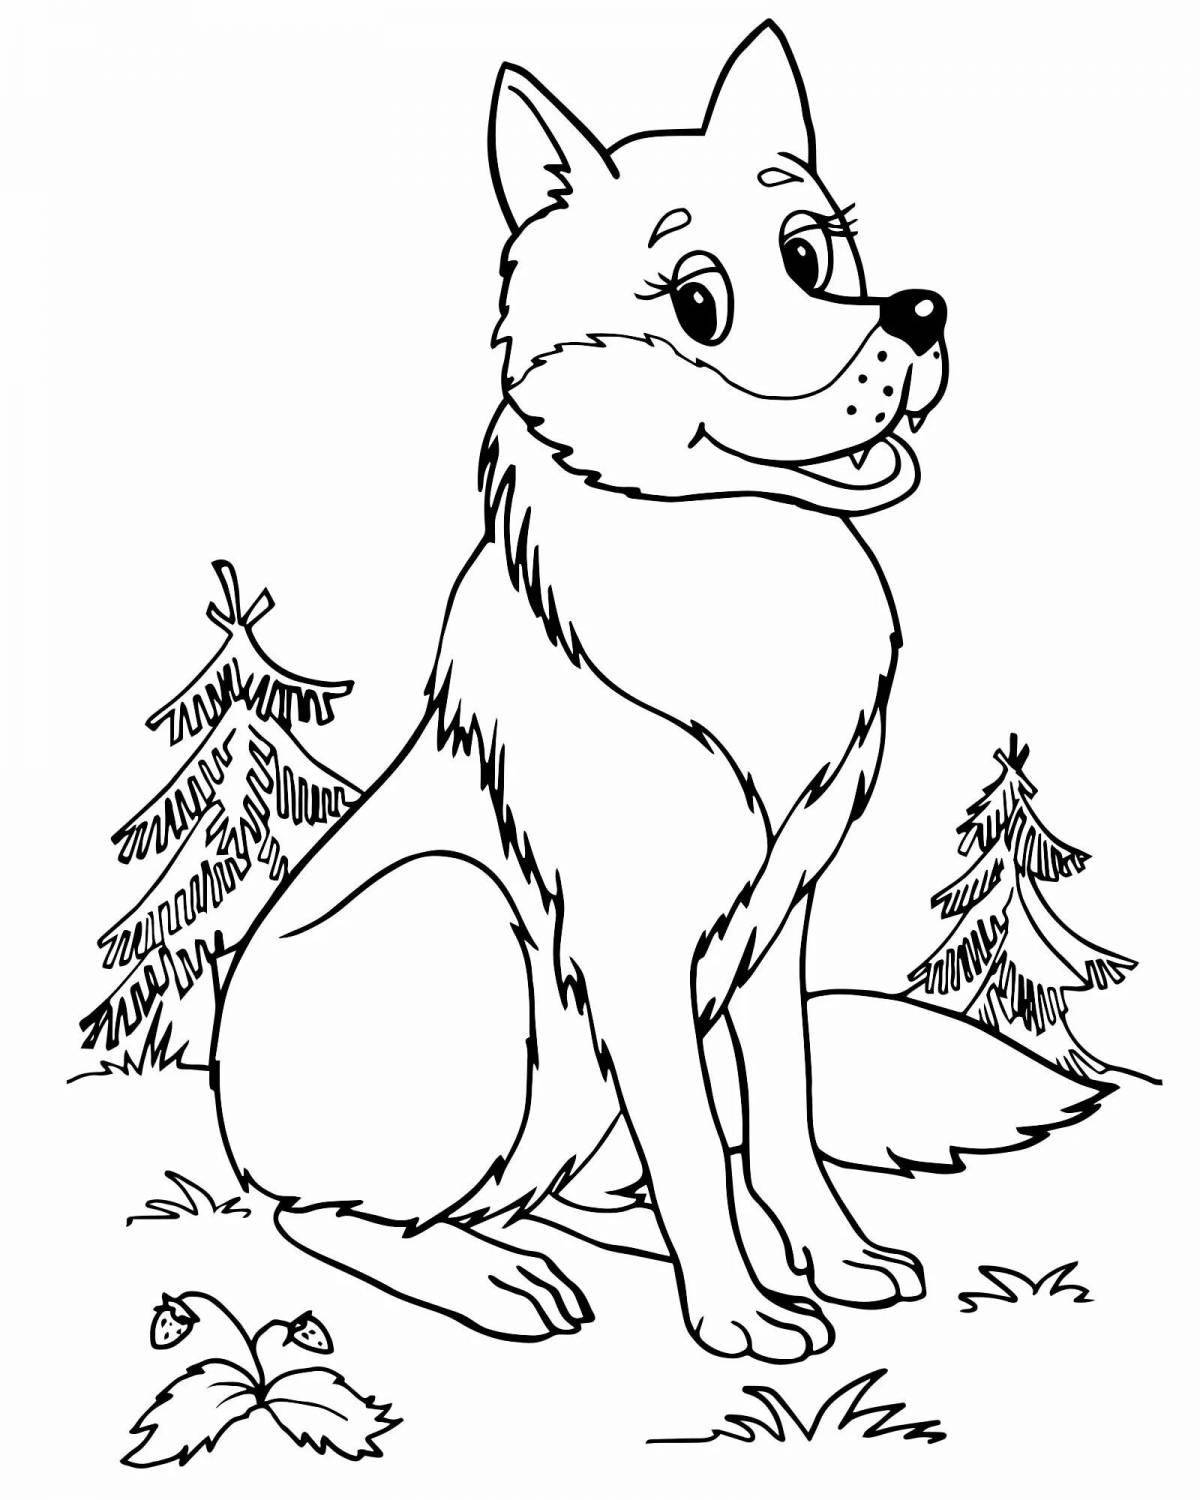 Scary wolf coloring book for kids